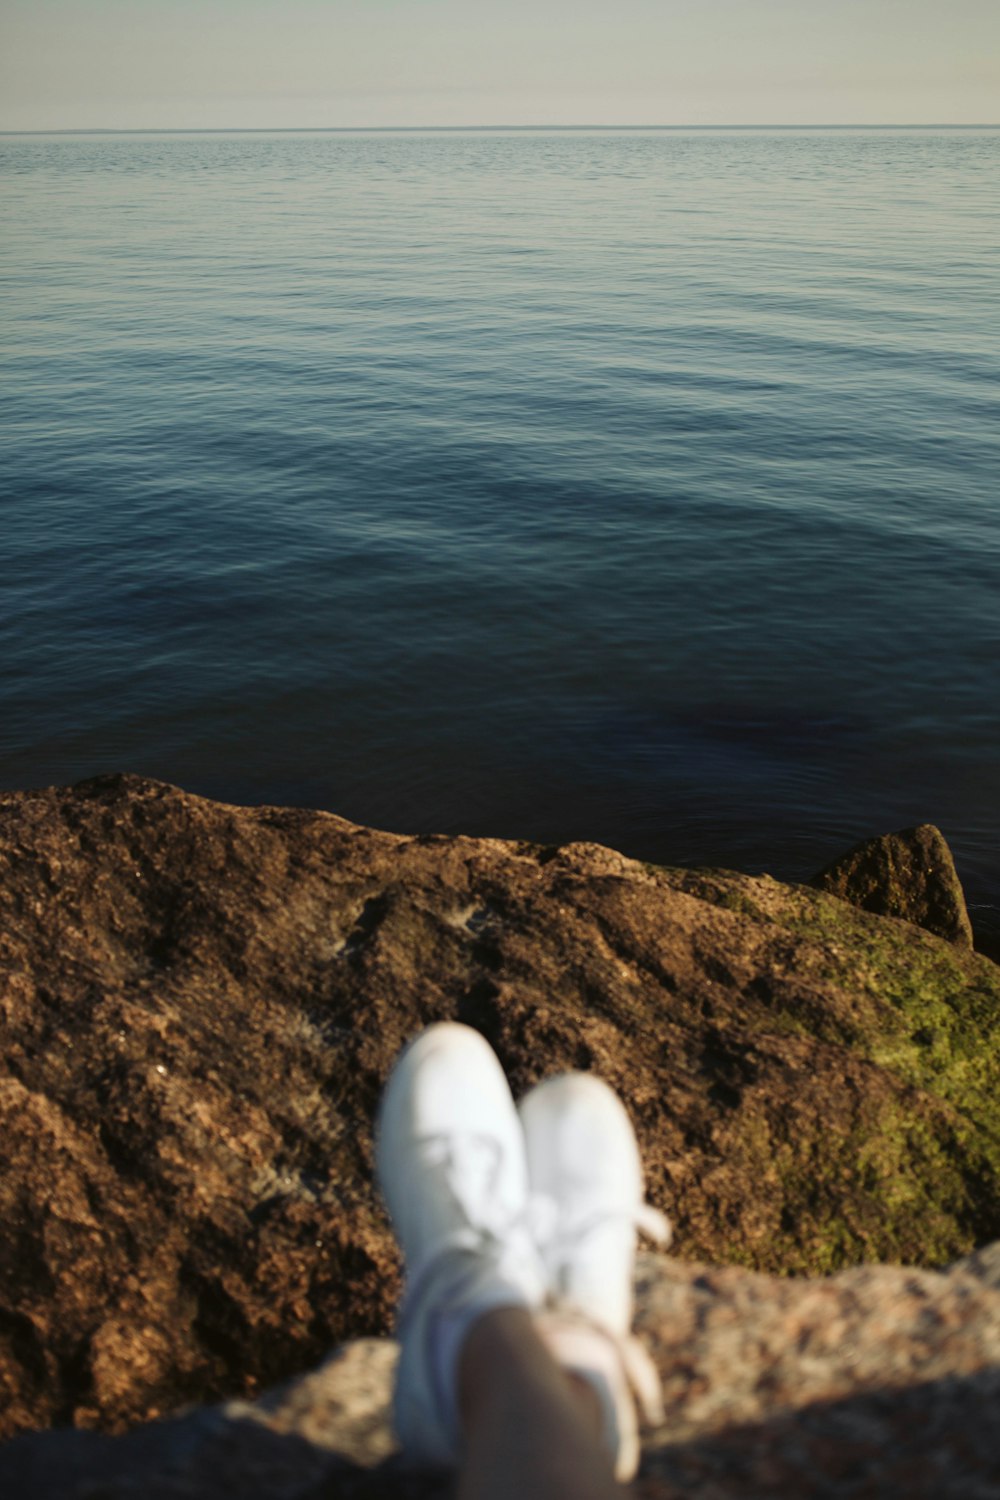 a person is sitting on a rock near the water